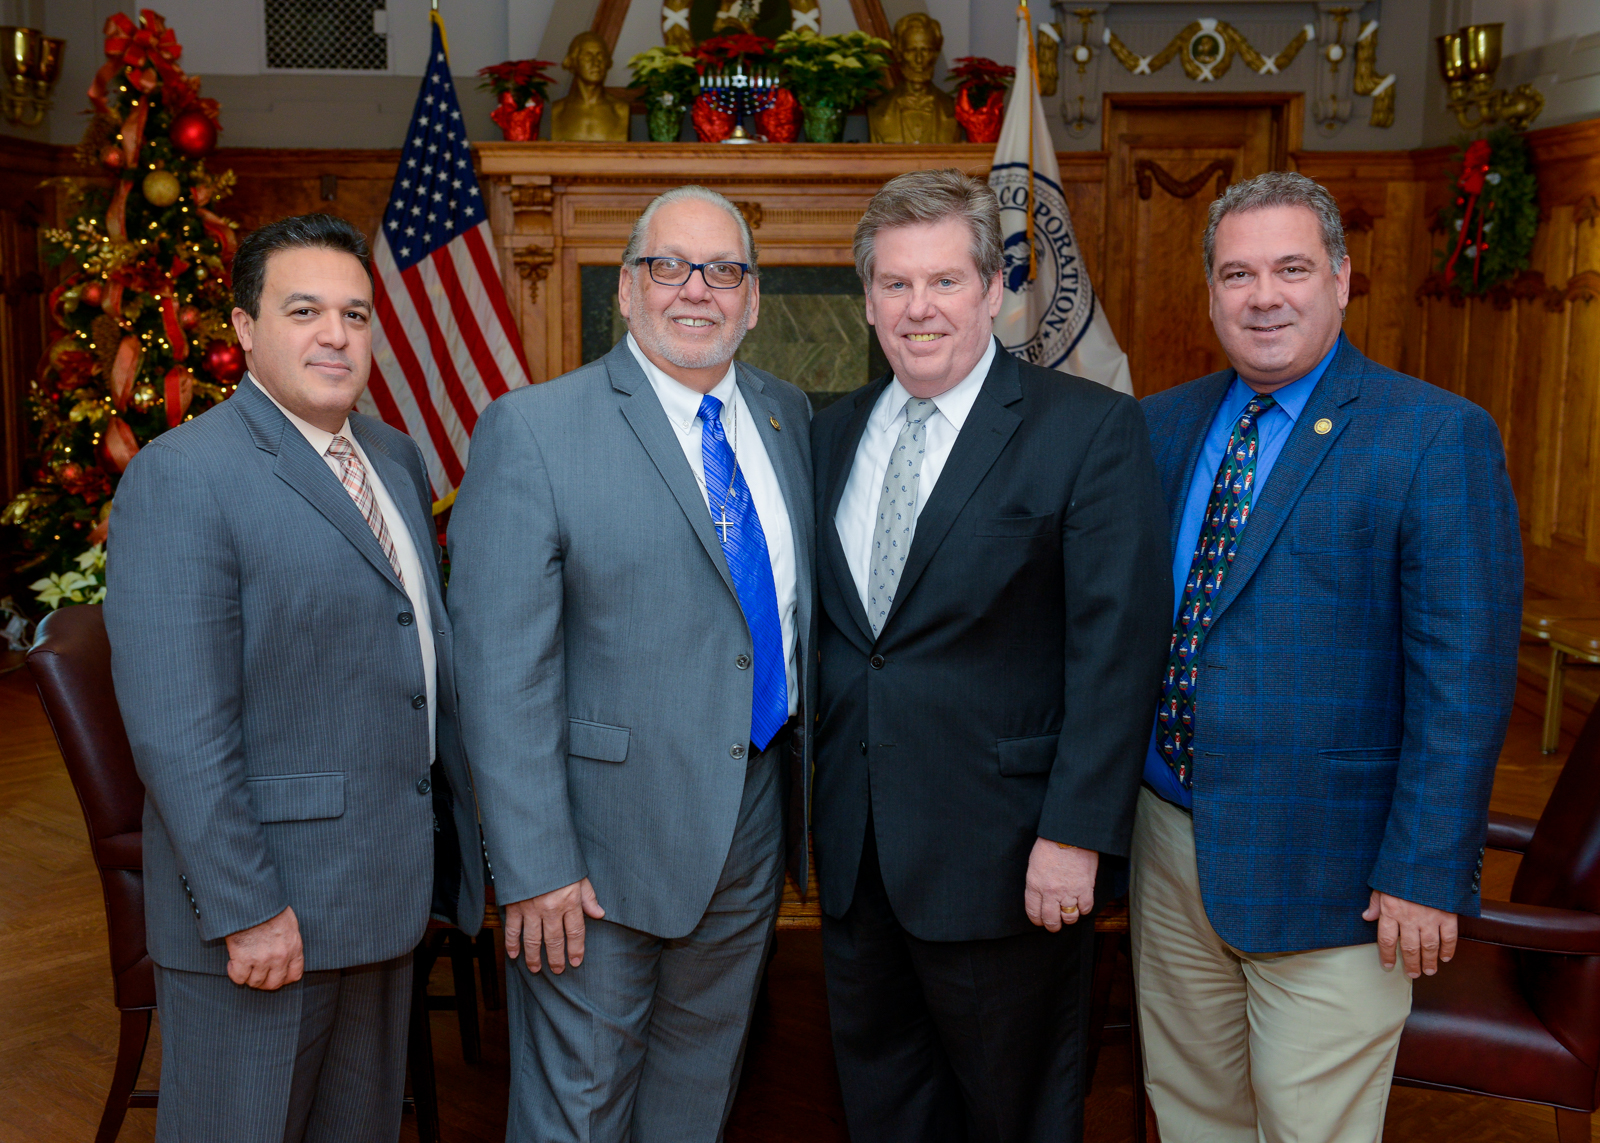 Yonkers News Roundup PRESS RELEASE Mayor Spano Appoints New Trustee